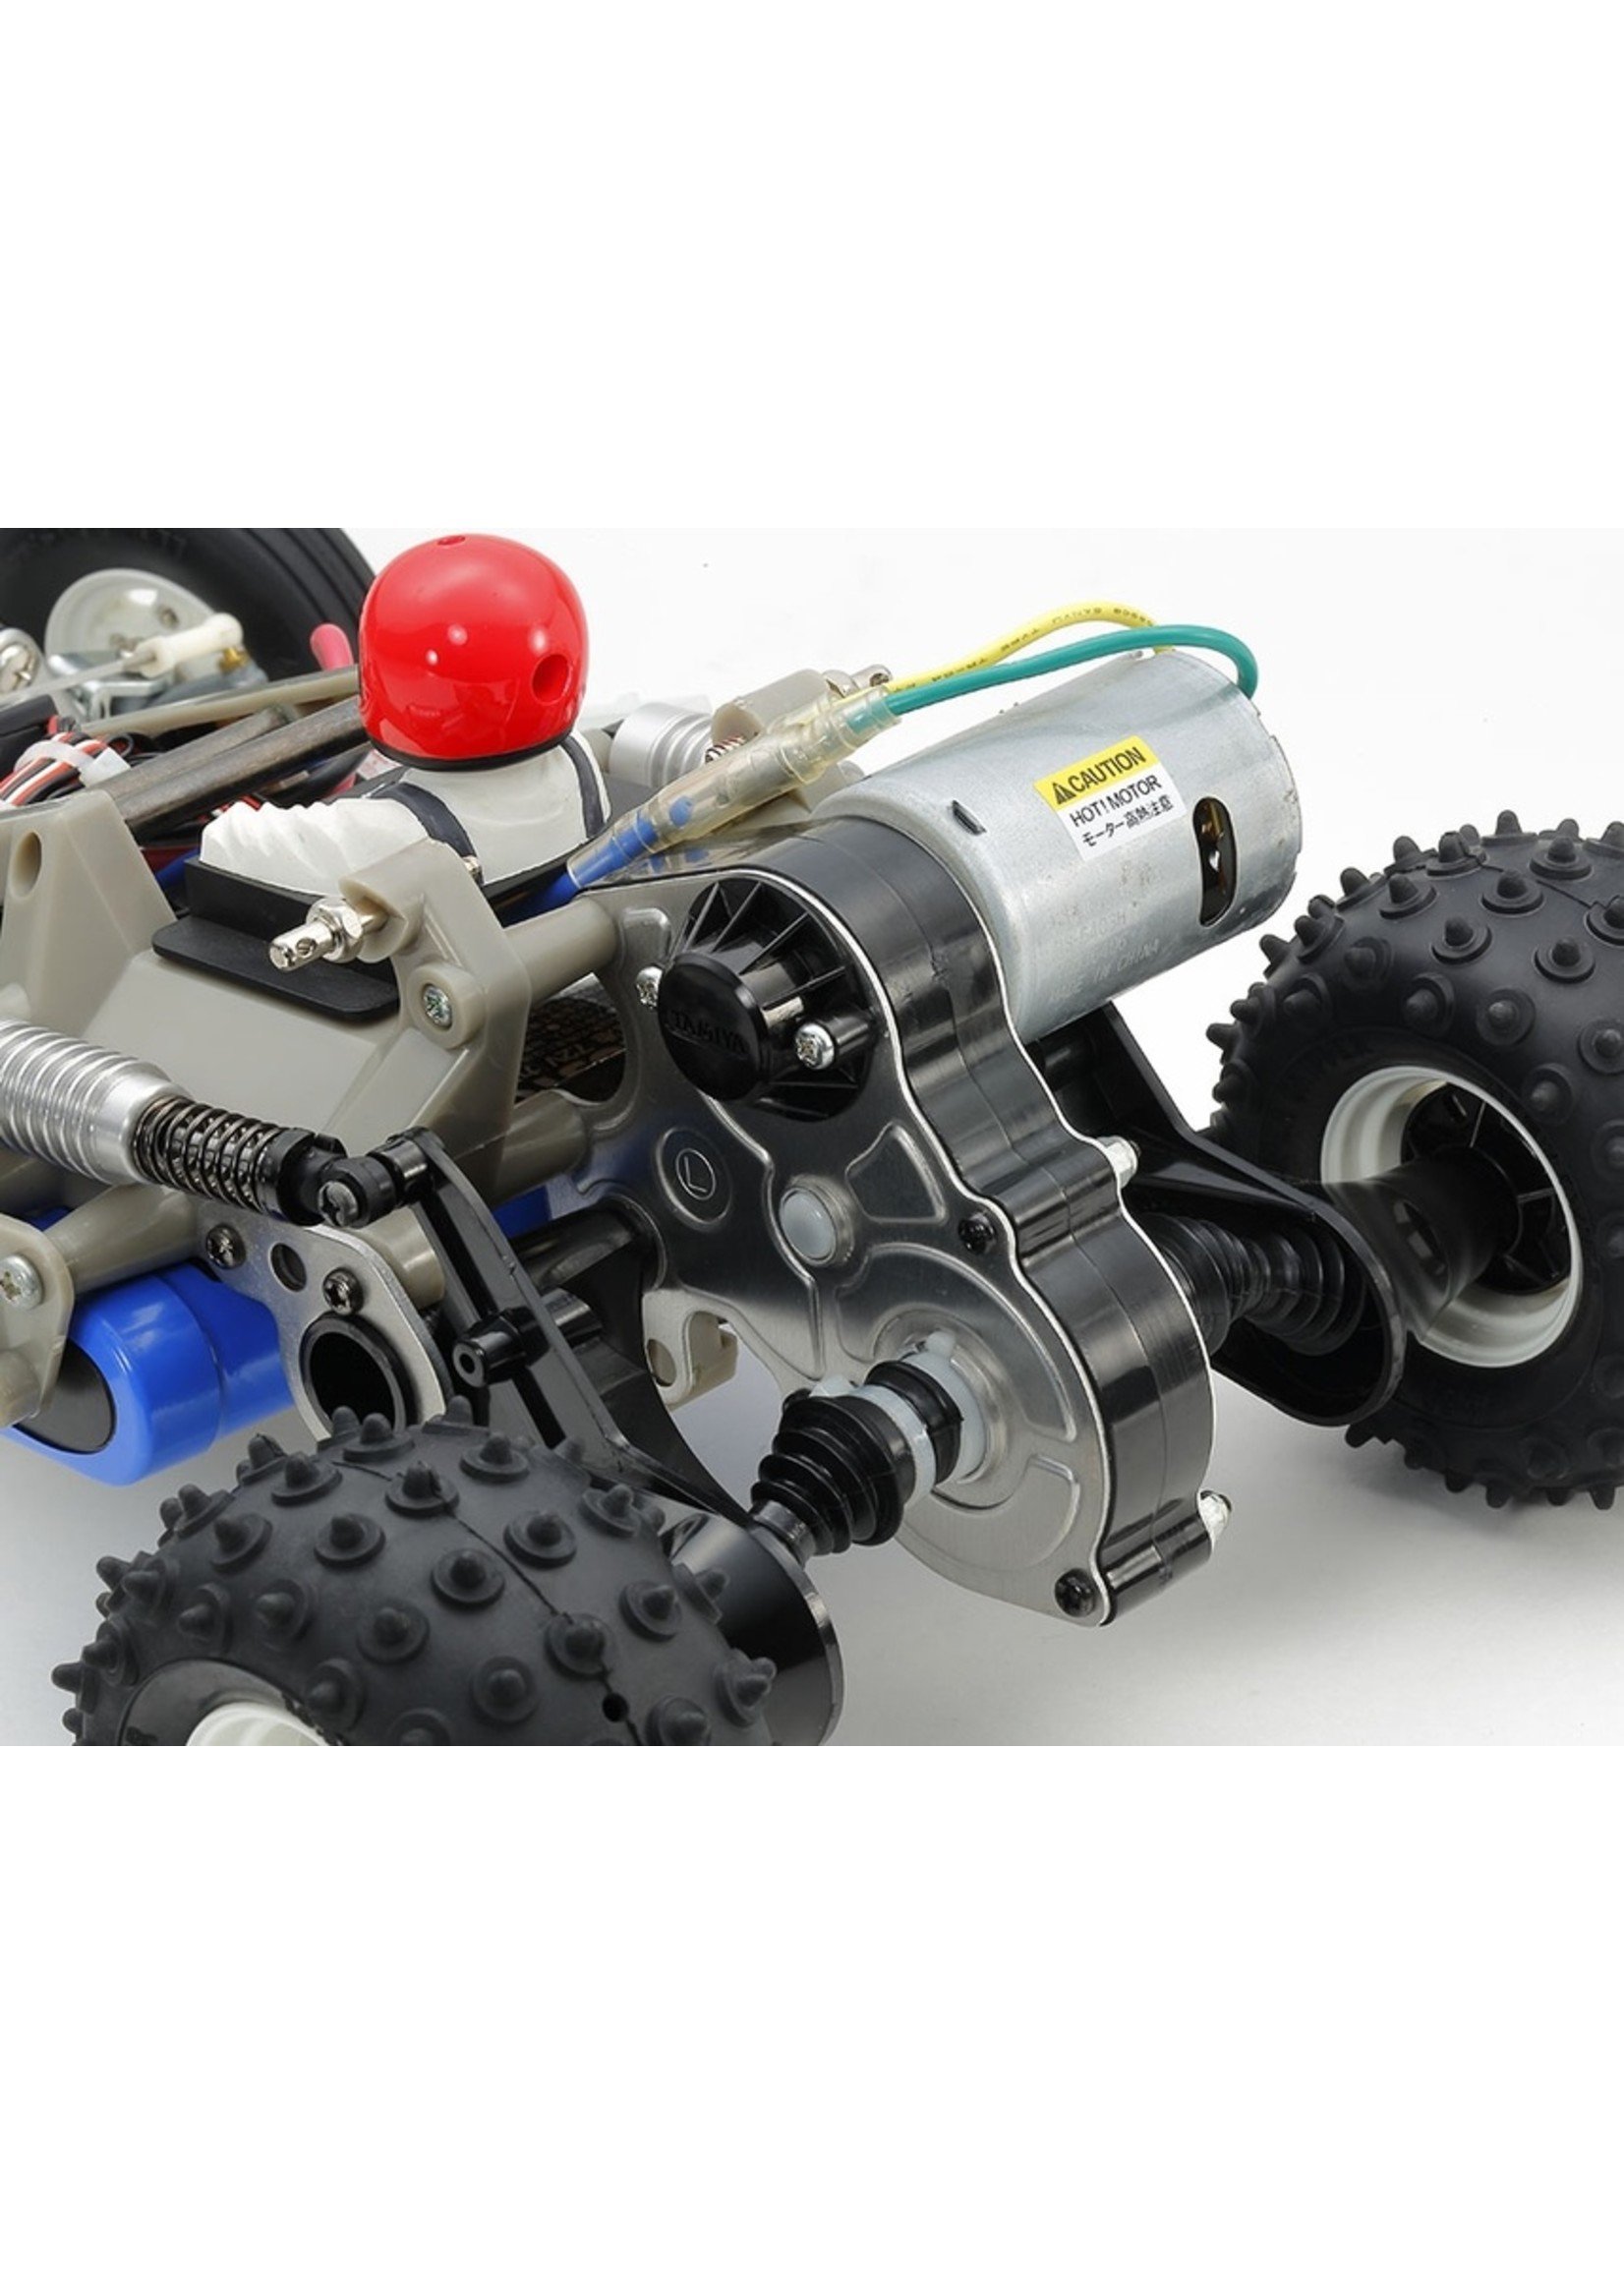 Tamiya 1/10 The Frog Re-Release Kit